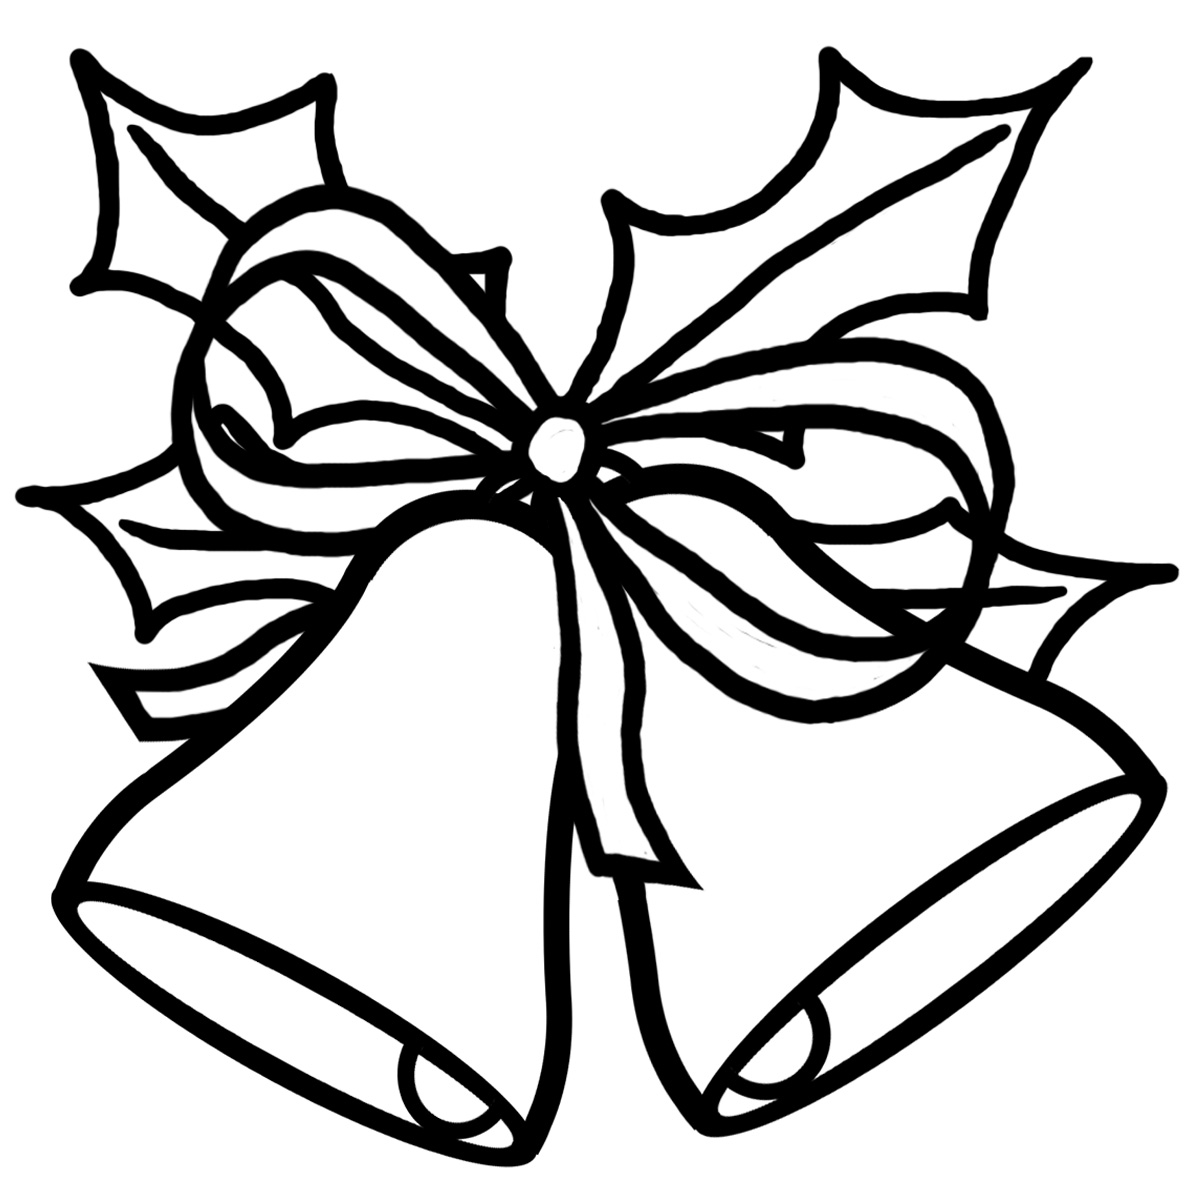 Christmas Present Clipart Black And White | Clipart Panda - Free .